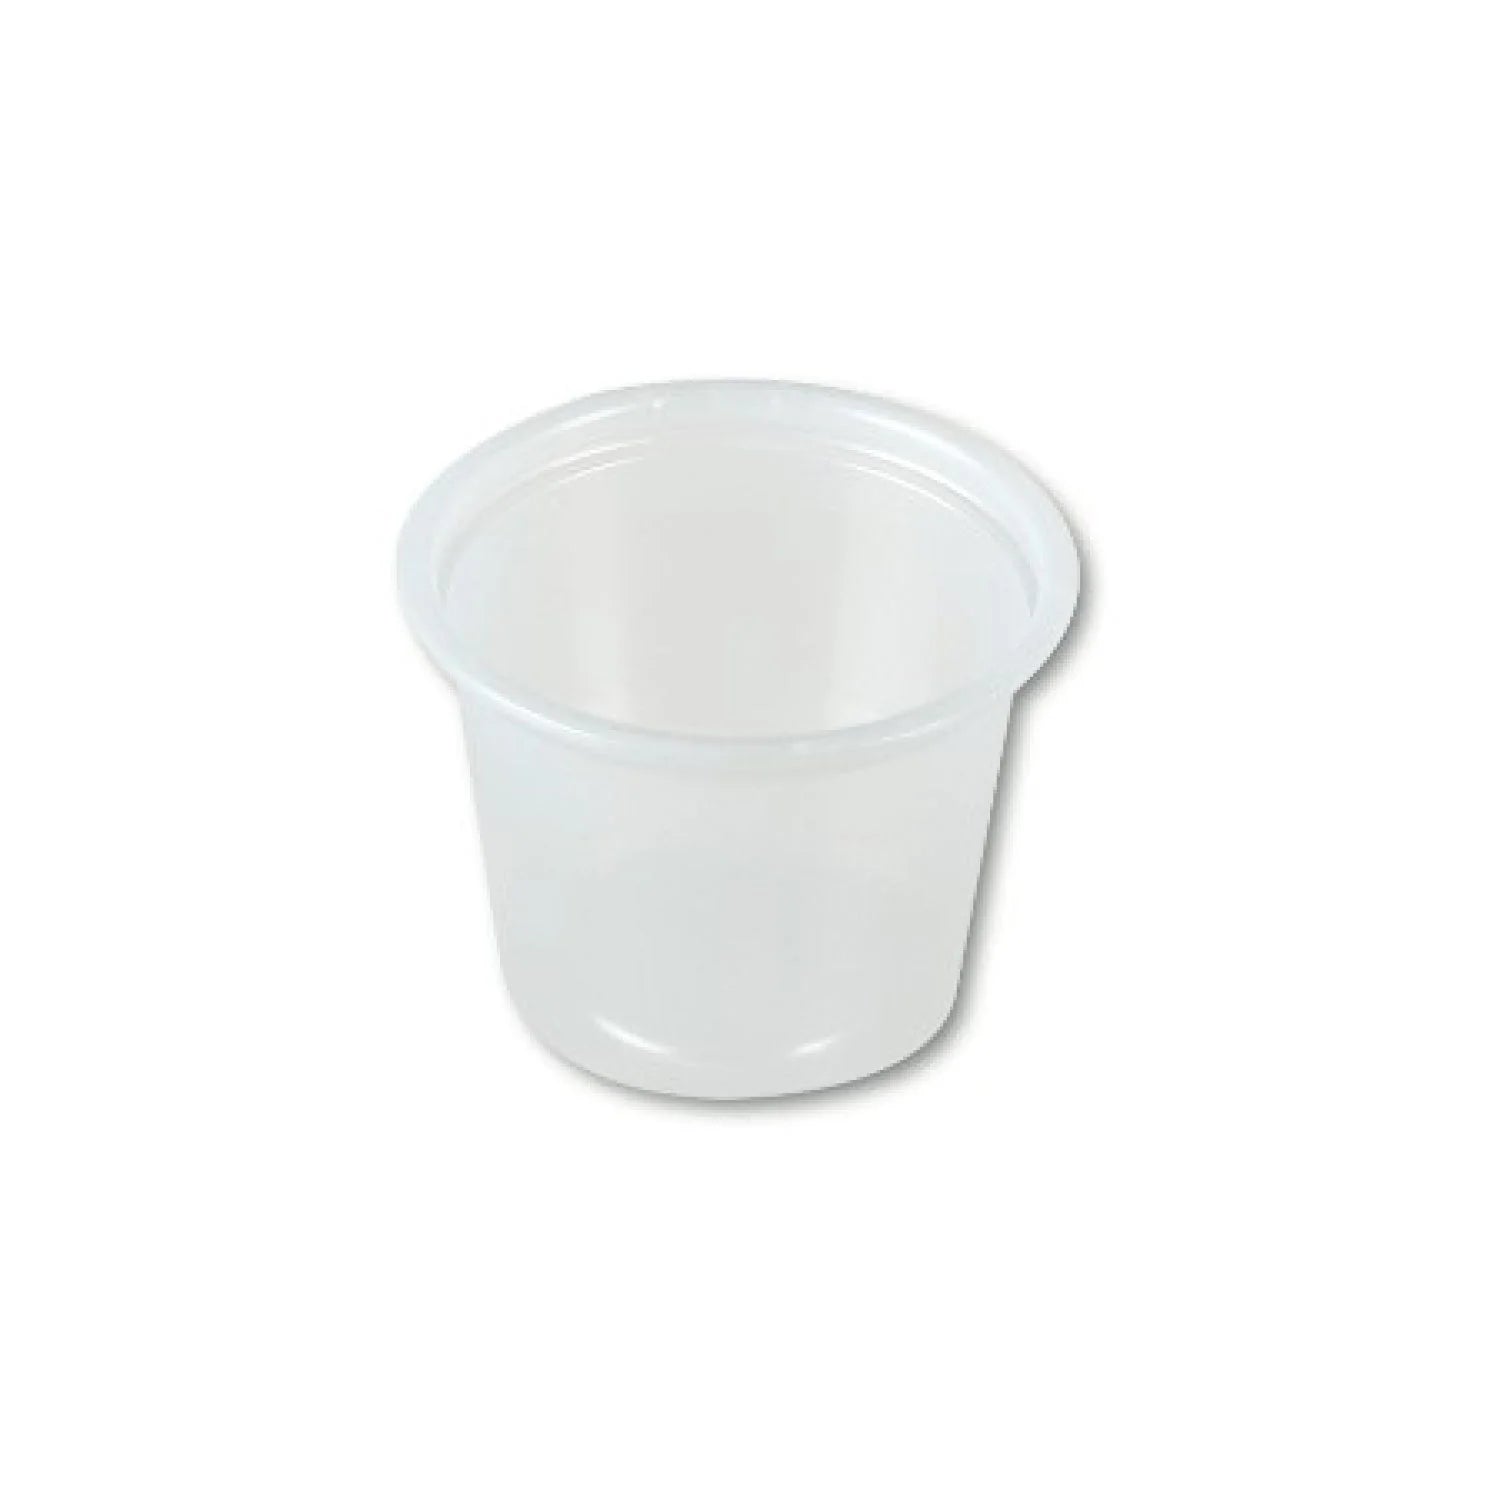 PPP - 5.5 Oz Portion Cups